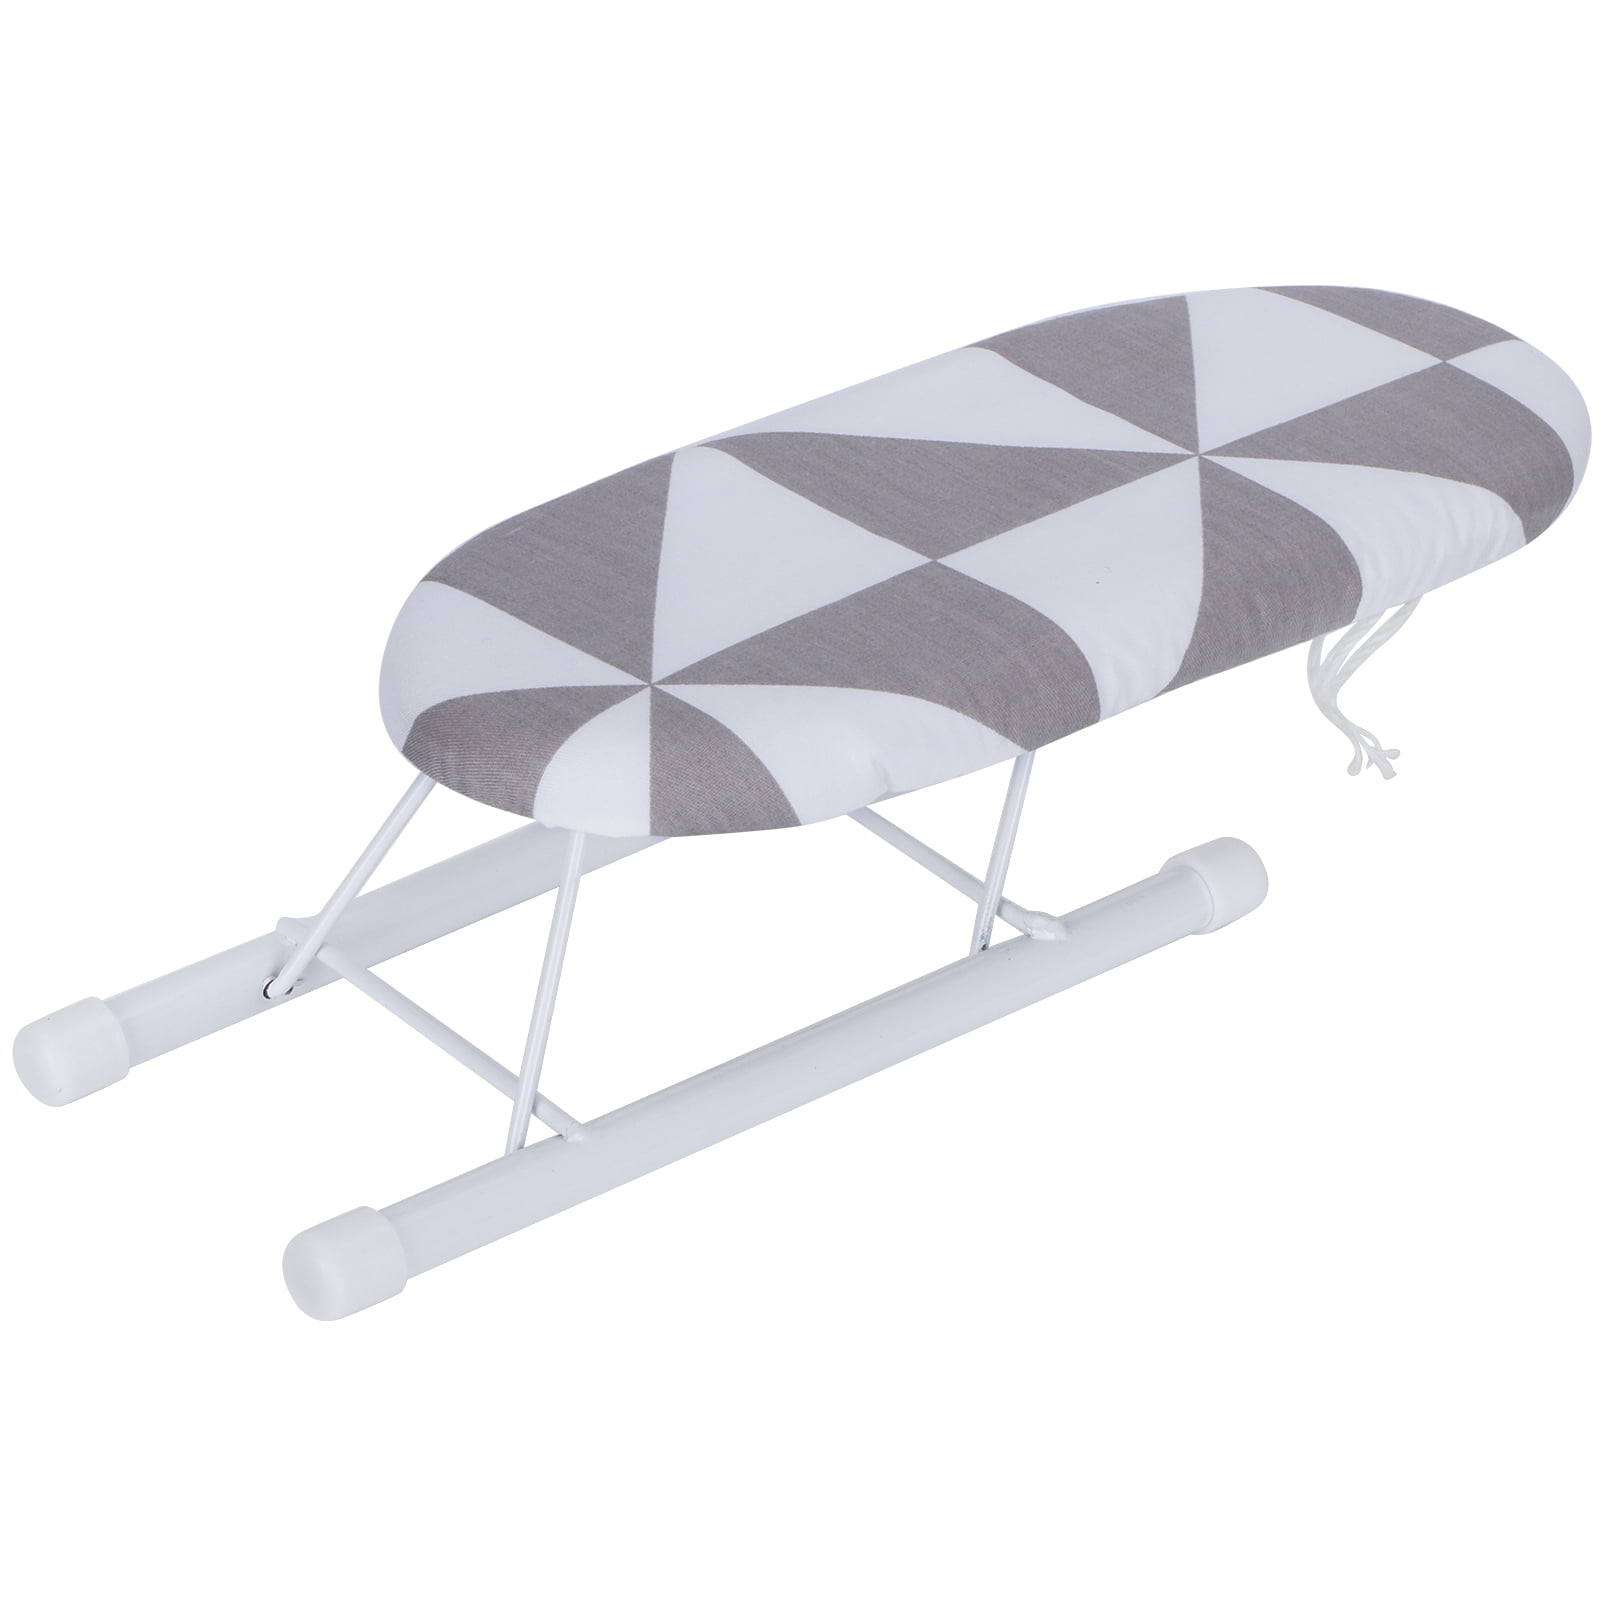 Perfect For Traveling And Urgent Ironing. IKEA JALL Tabletop Ironing Board 